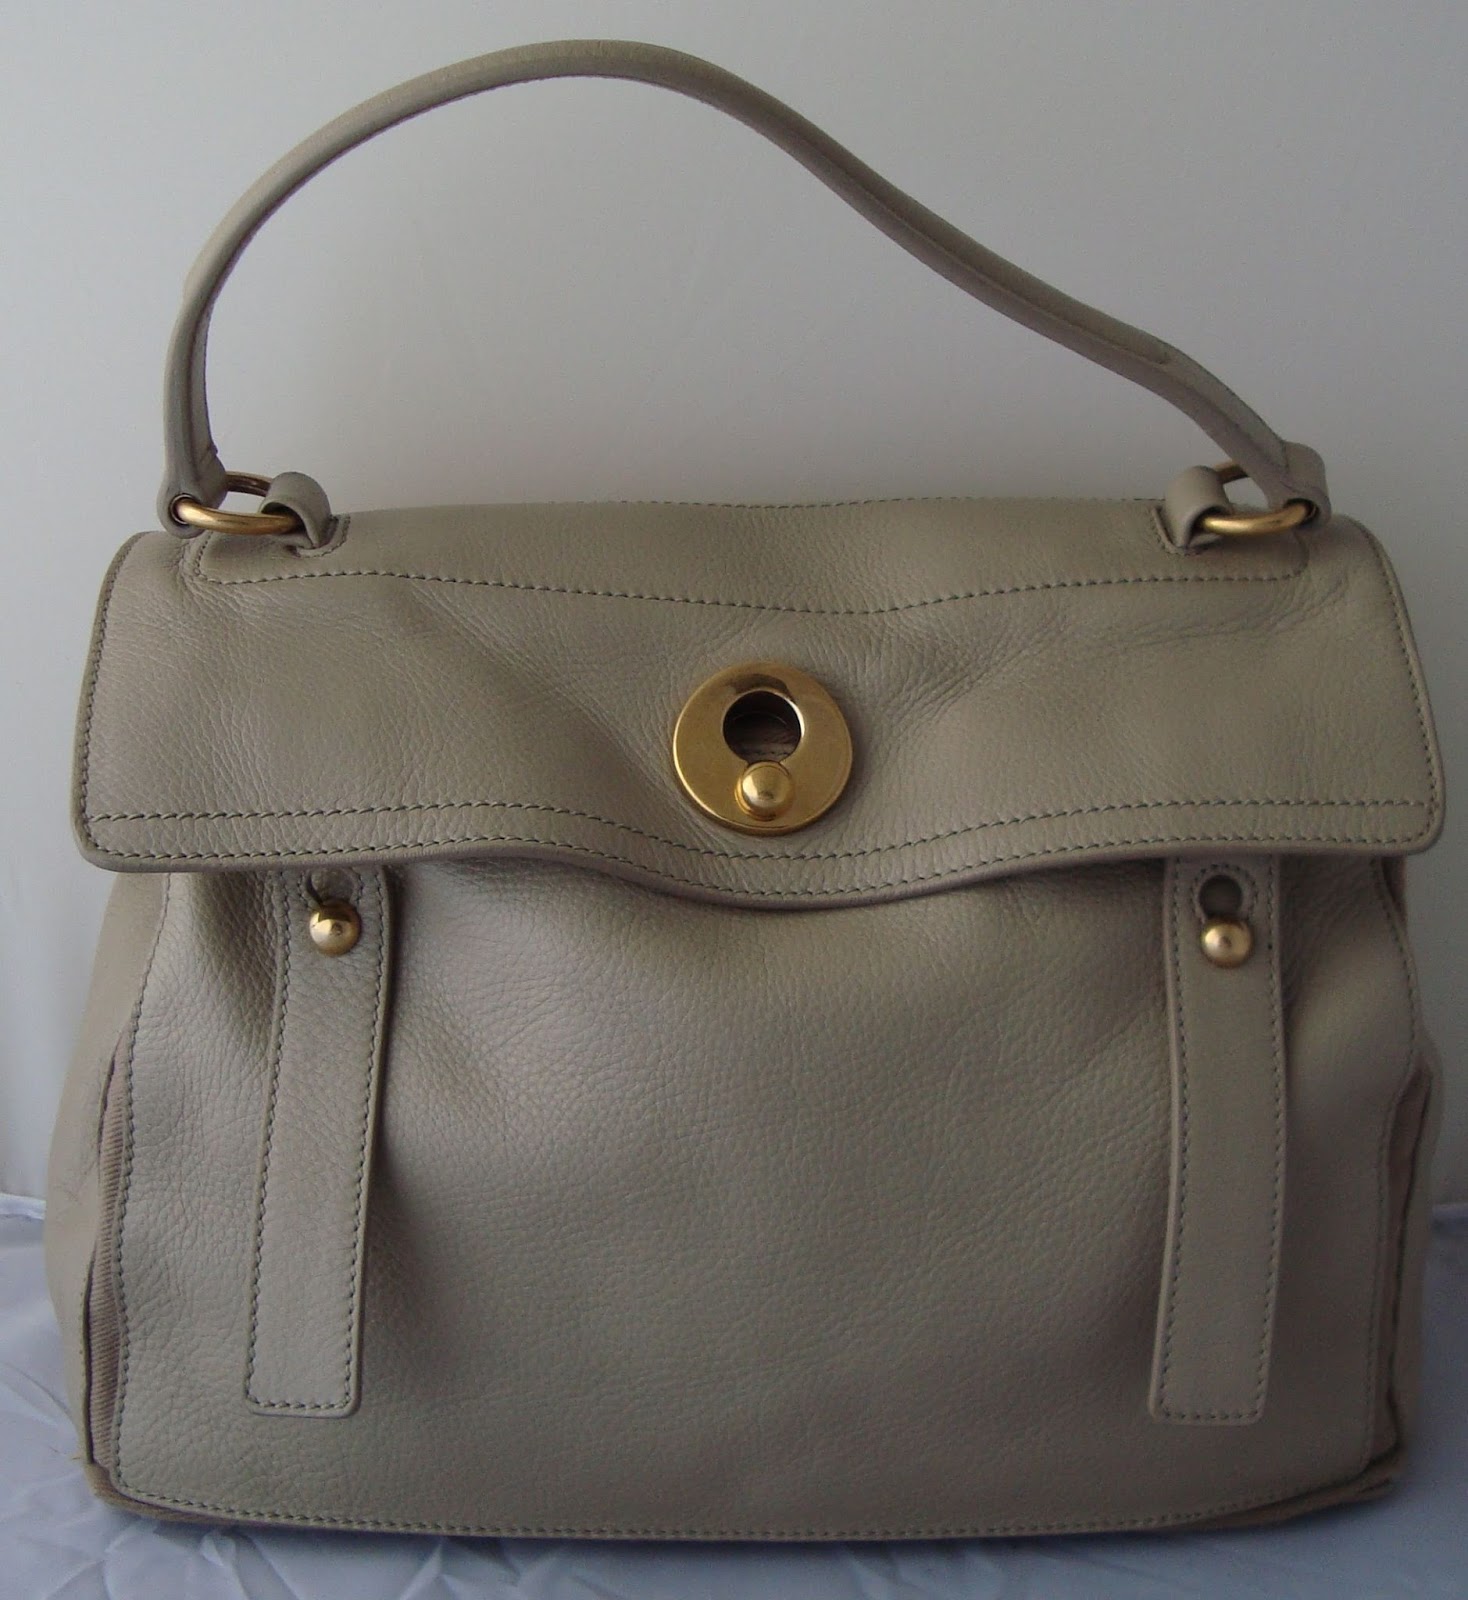 LSK COLLECTION FOR SALE: YSL MUSE TWO BEIGE ECRU LEATHER BAG  